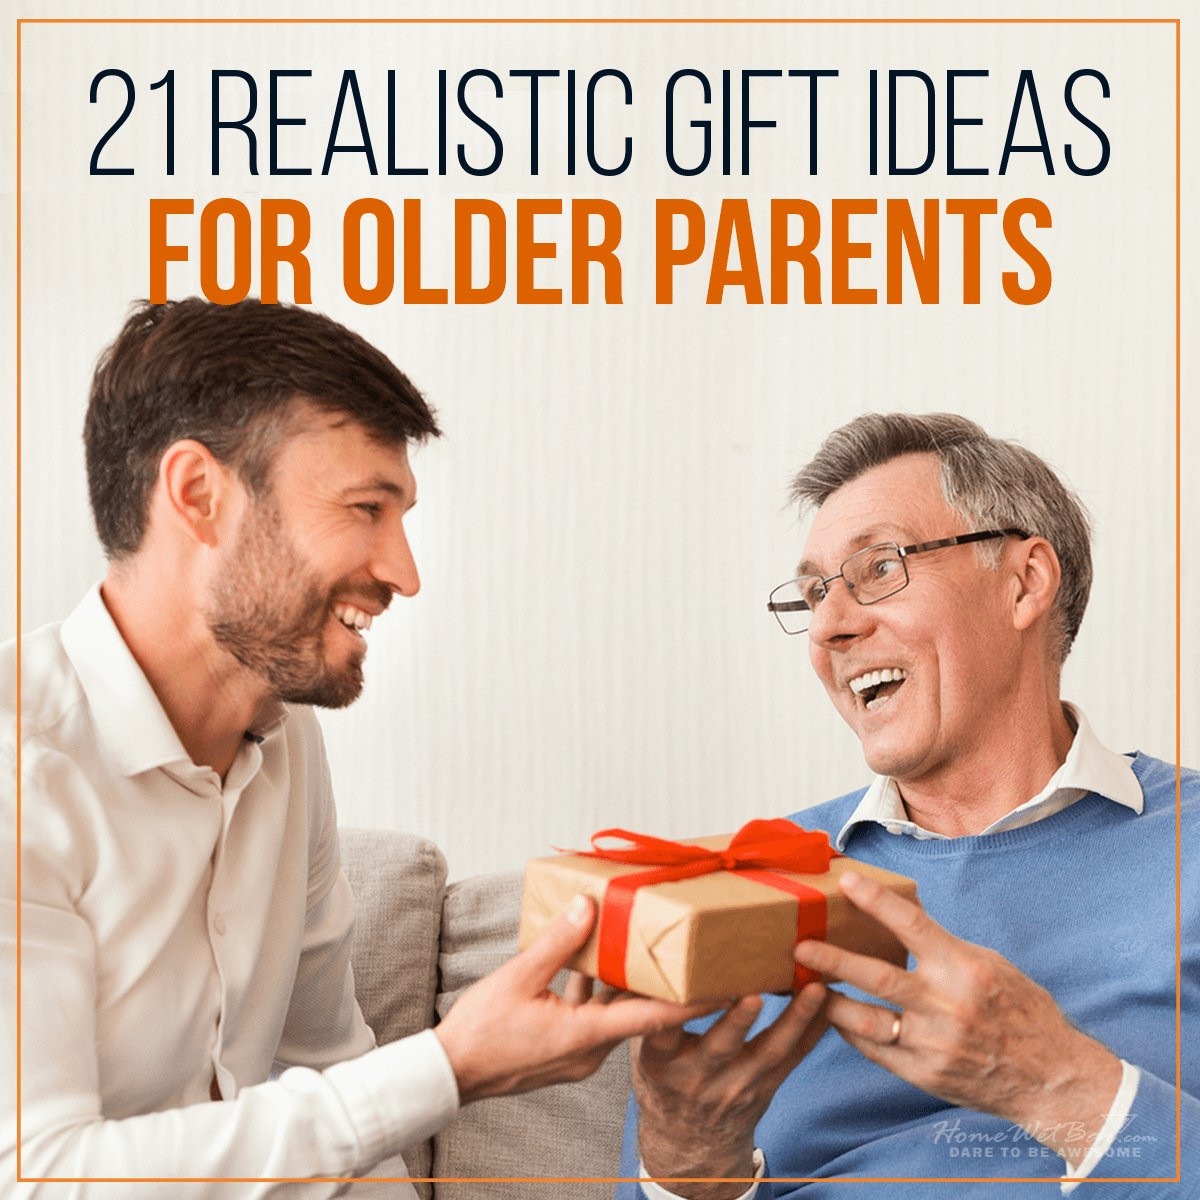 Gift Ideas For Elderly Mother
 21 Realistic Gift Ideas for Older Parents